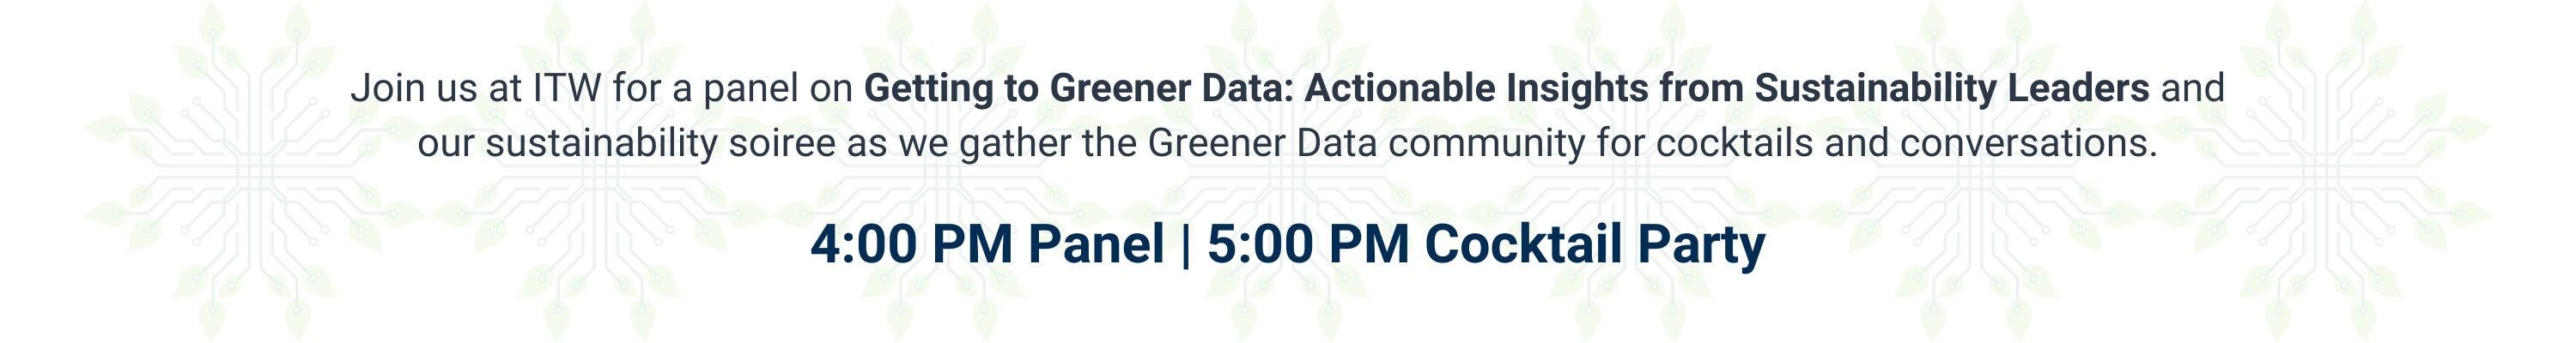 Join us at ITW for a panel on Getting to Greener Data Actionable Insights from Sustainability Leaders and our sustainability soiree as we gather the Greener Data community for cocktails and conversations. 400 PM Pane (2)